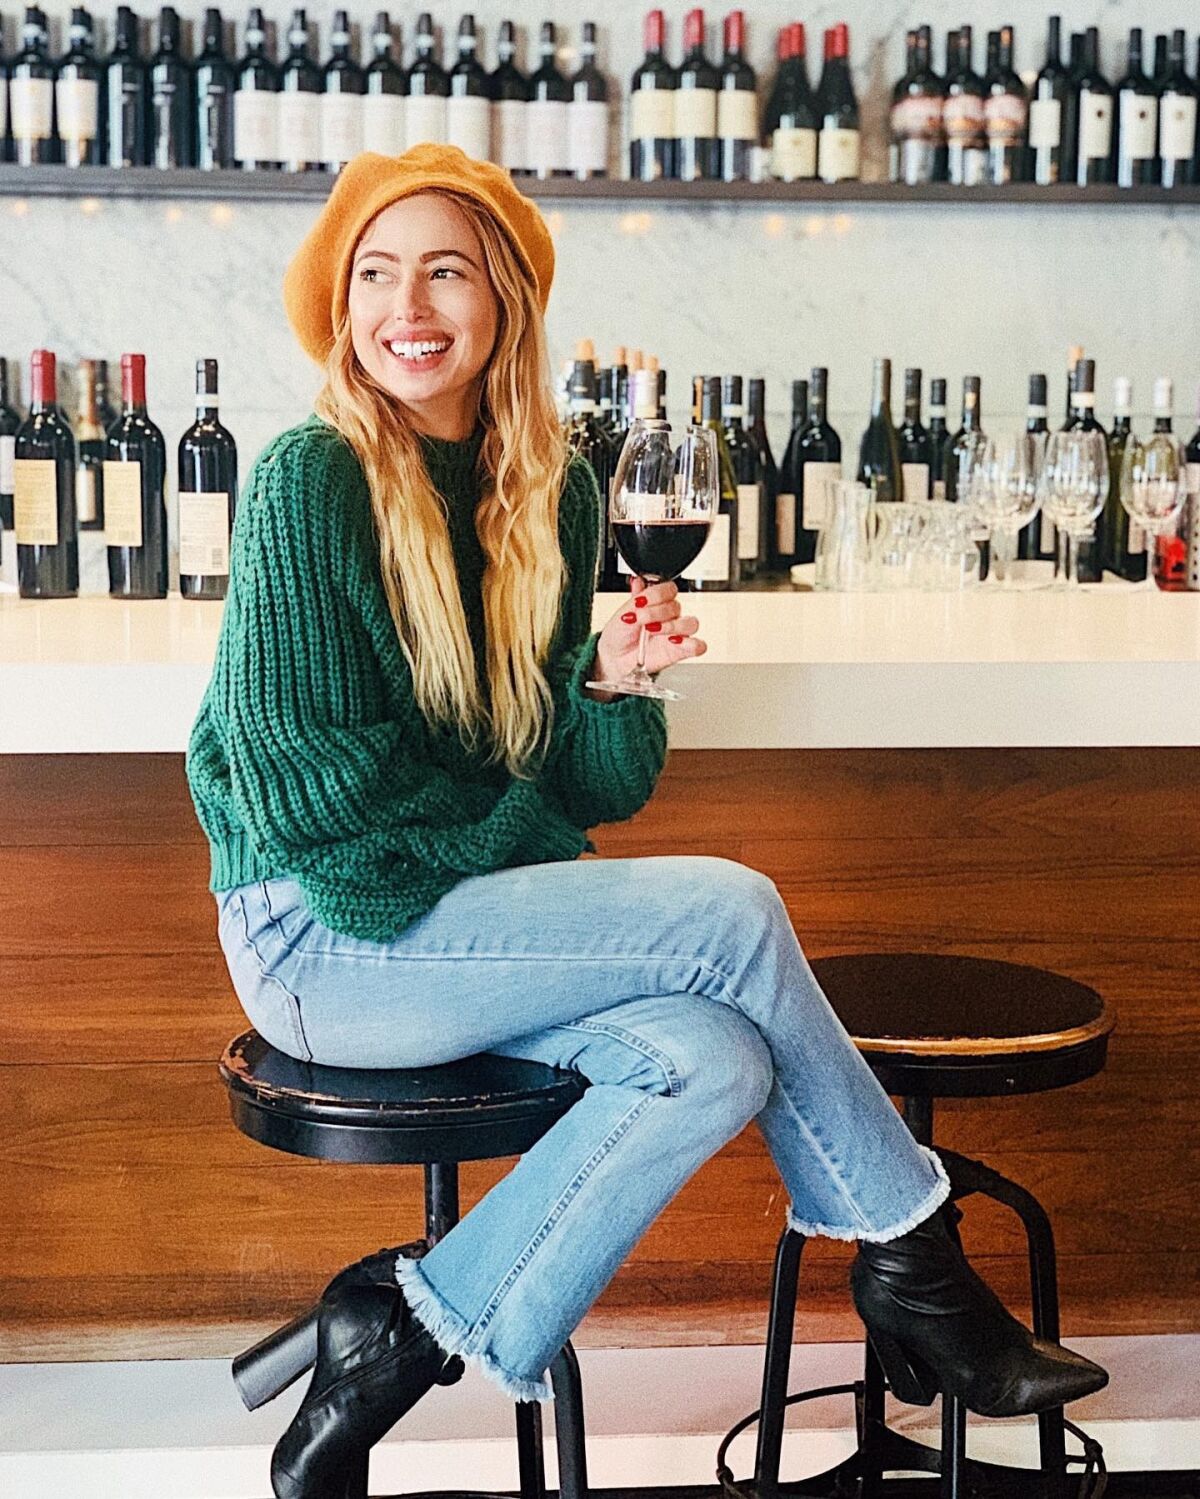 Arielle Meads runs the wine and fashion blog Pourstyles.